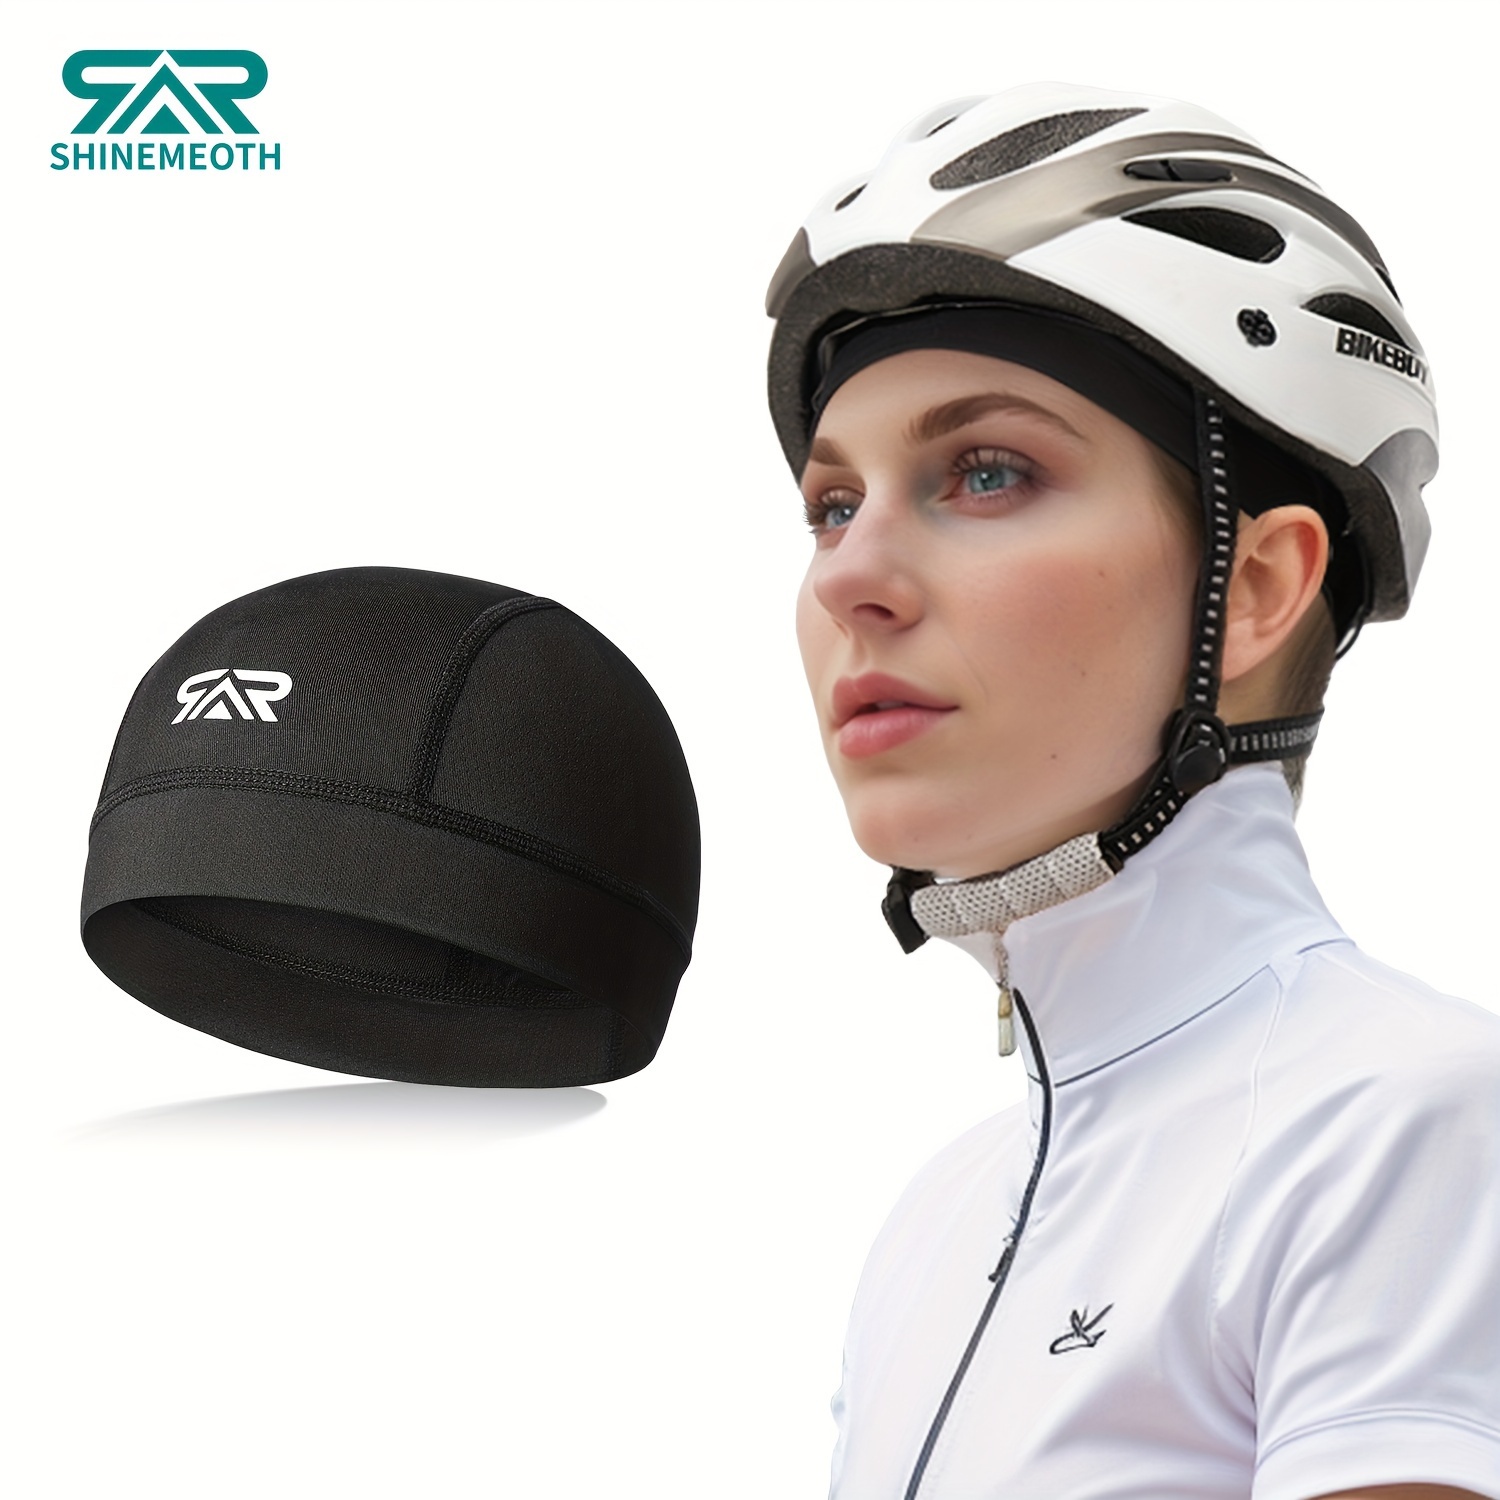 

1/2 Pcs Moisture Wicking Brimless For Cycling & Outdoor Sports - Sun Protection & Breathable Helmet Liner